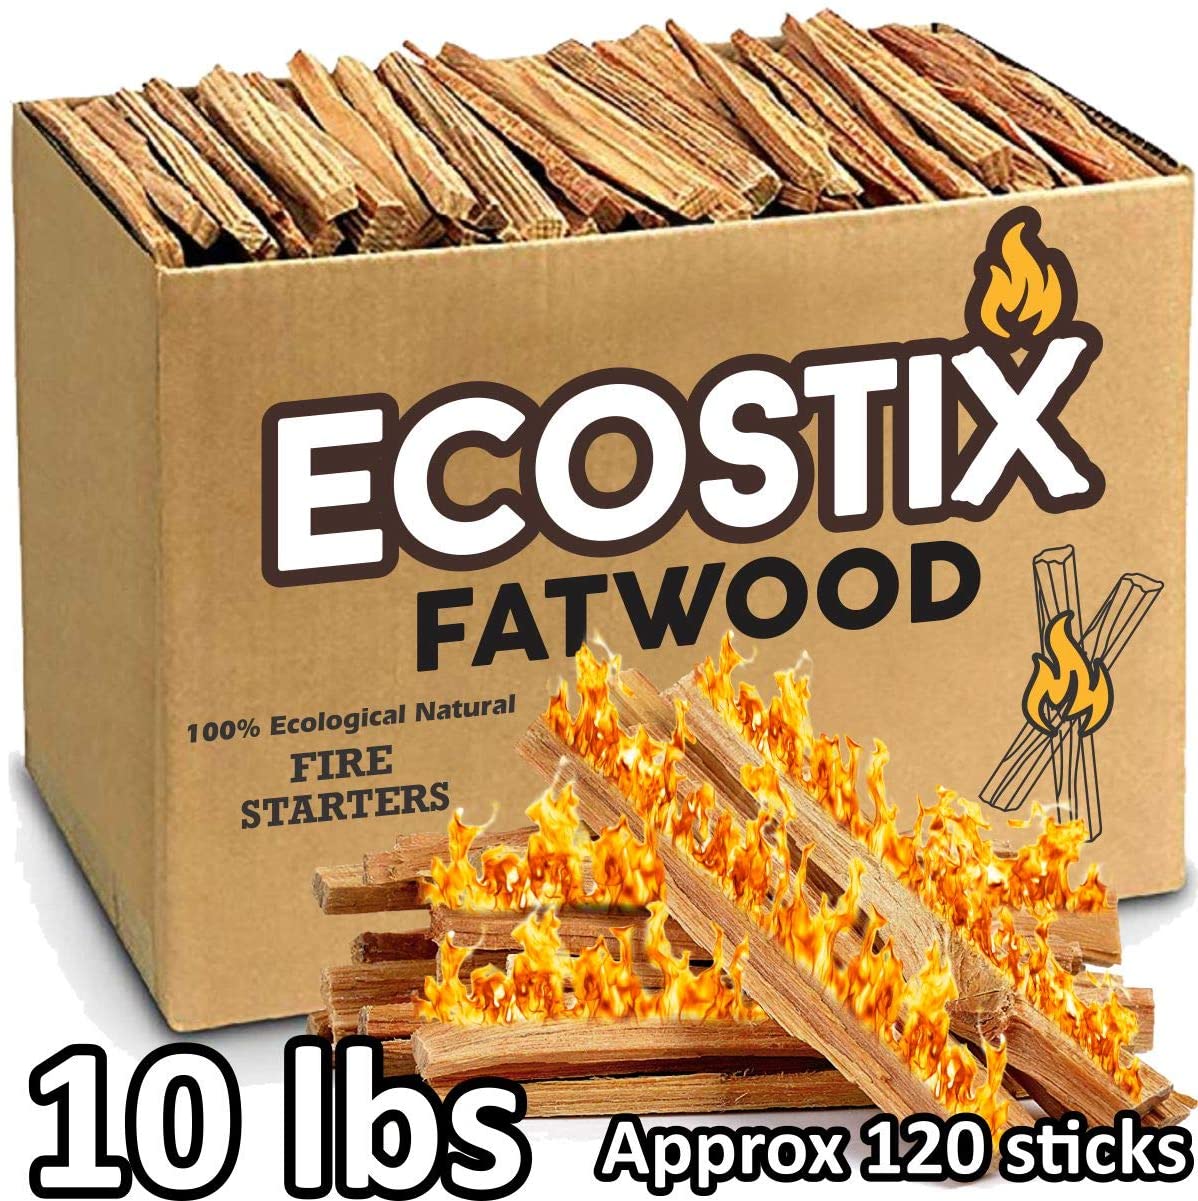 EasyGoProducts Approx. 120 Eco-Stix Fatwood Fire Starter Kindling Firewood Sticks – 100% Organic – Firestarter for Wood Stoves, Fireplaces, Campfires, Bonfires, 10 Lbs - (For 6 piece(s))